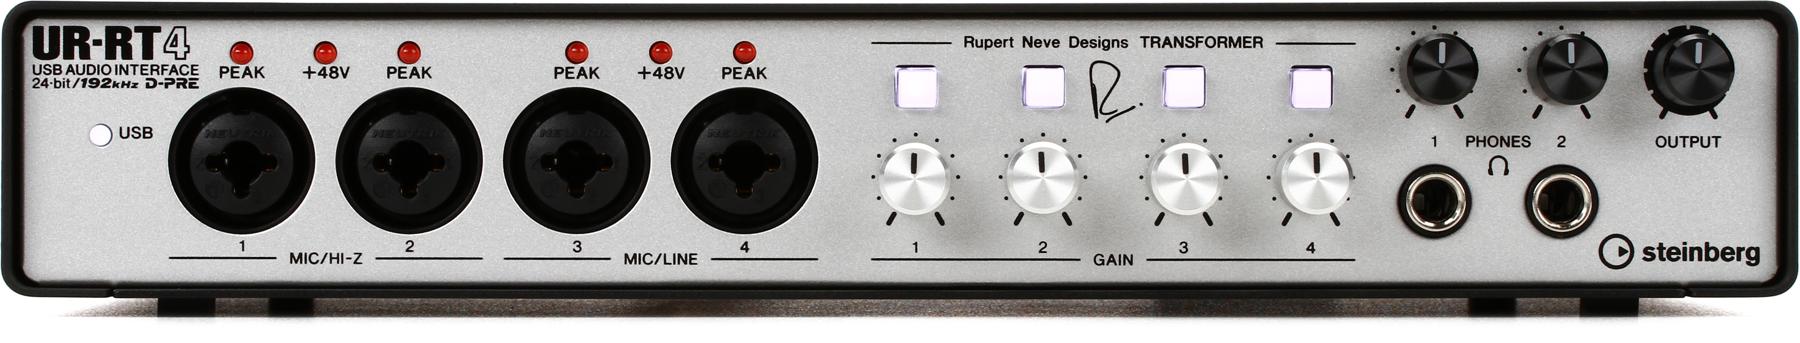 Steinberg UR-RT4 USB Audio Interface with 4 Rupert Neve Transformers-image